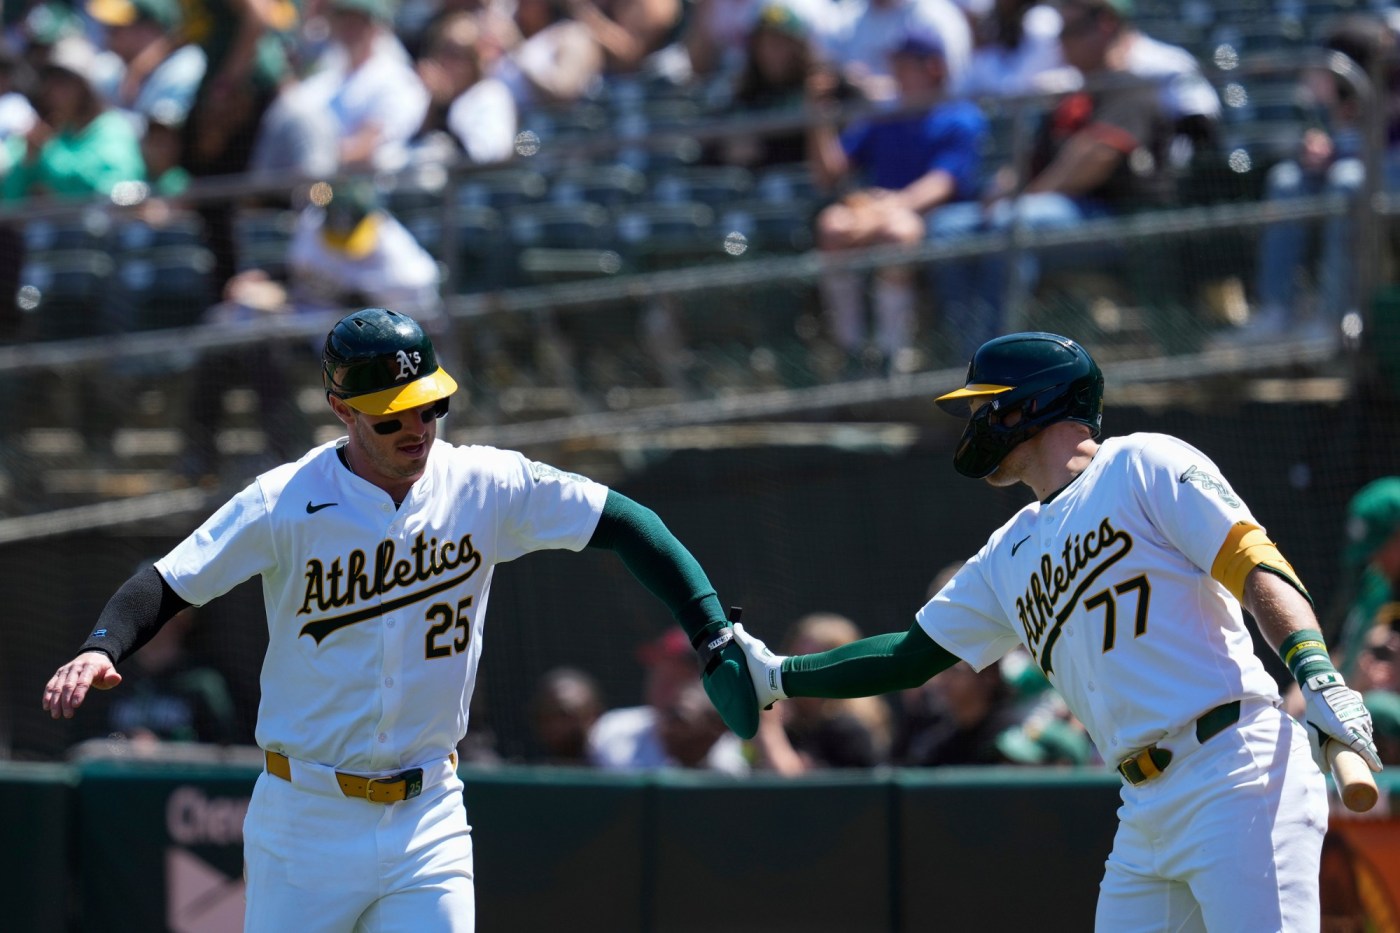 athletics-fall-behind-early,-see-six-game-win-streak-snapped-against-marlins